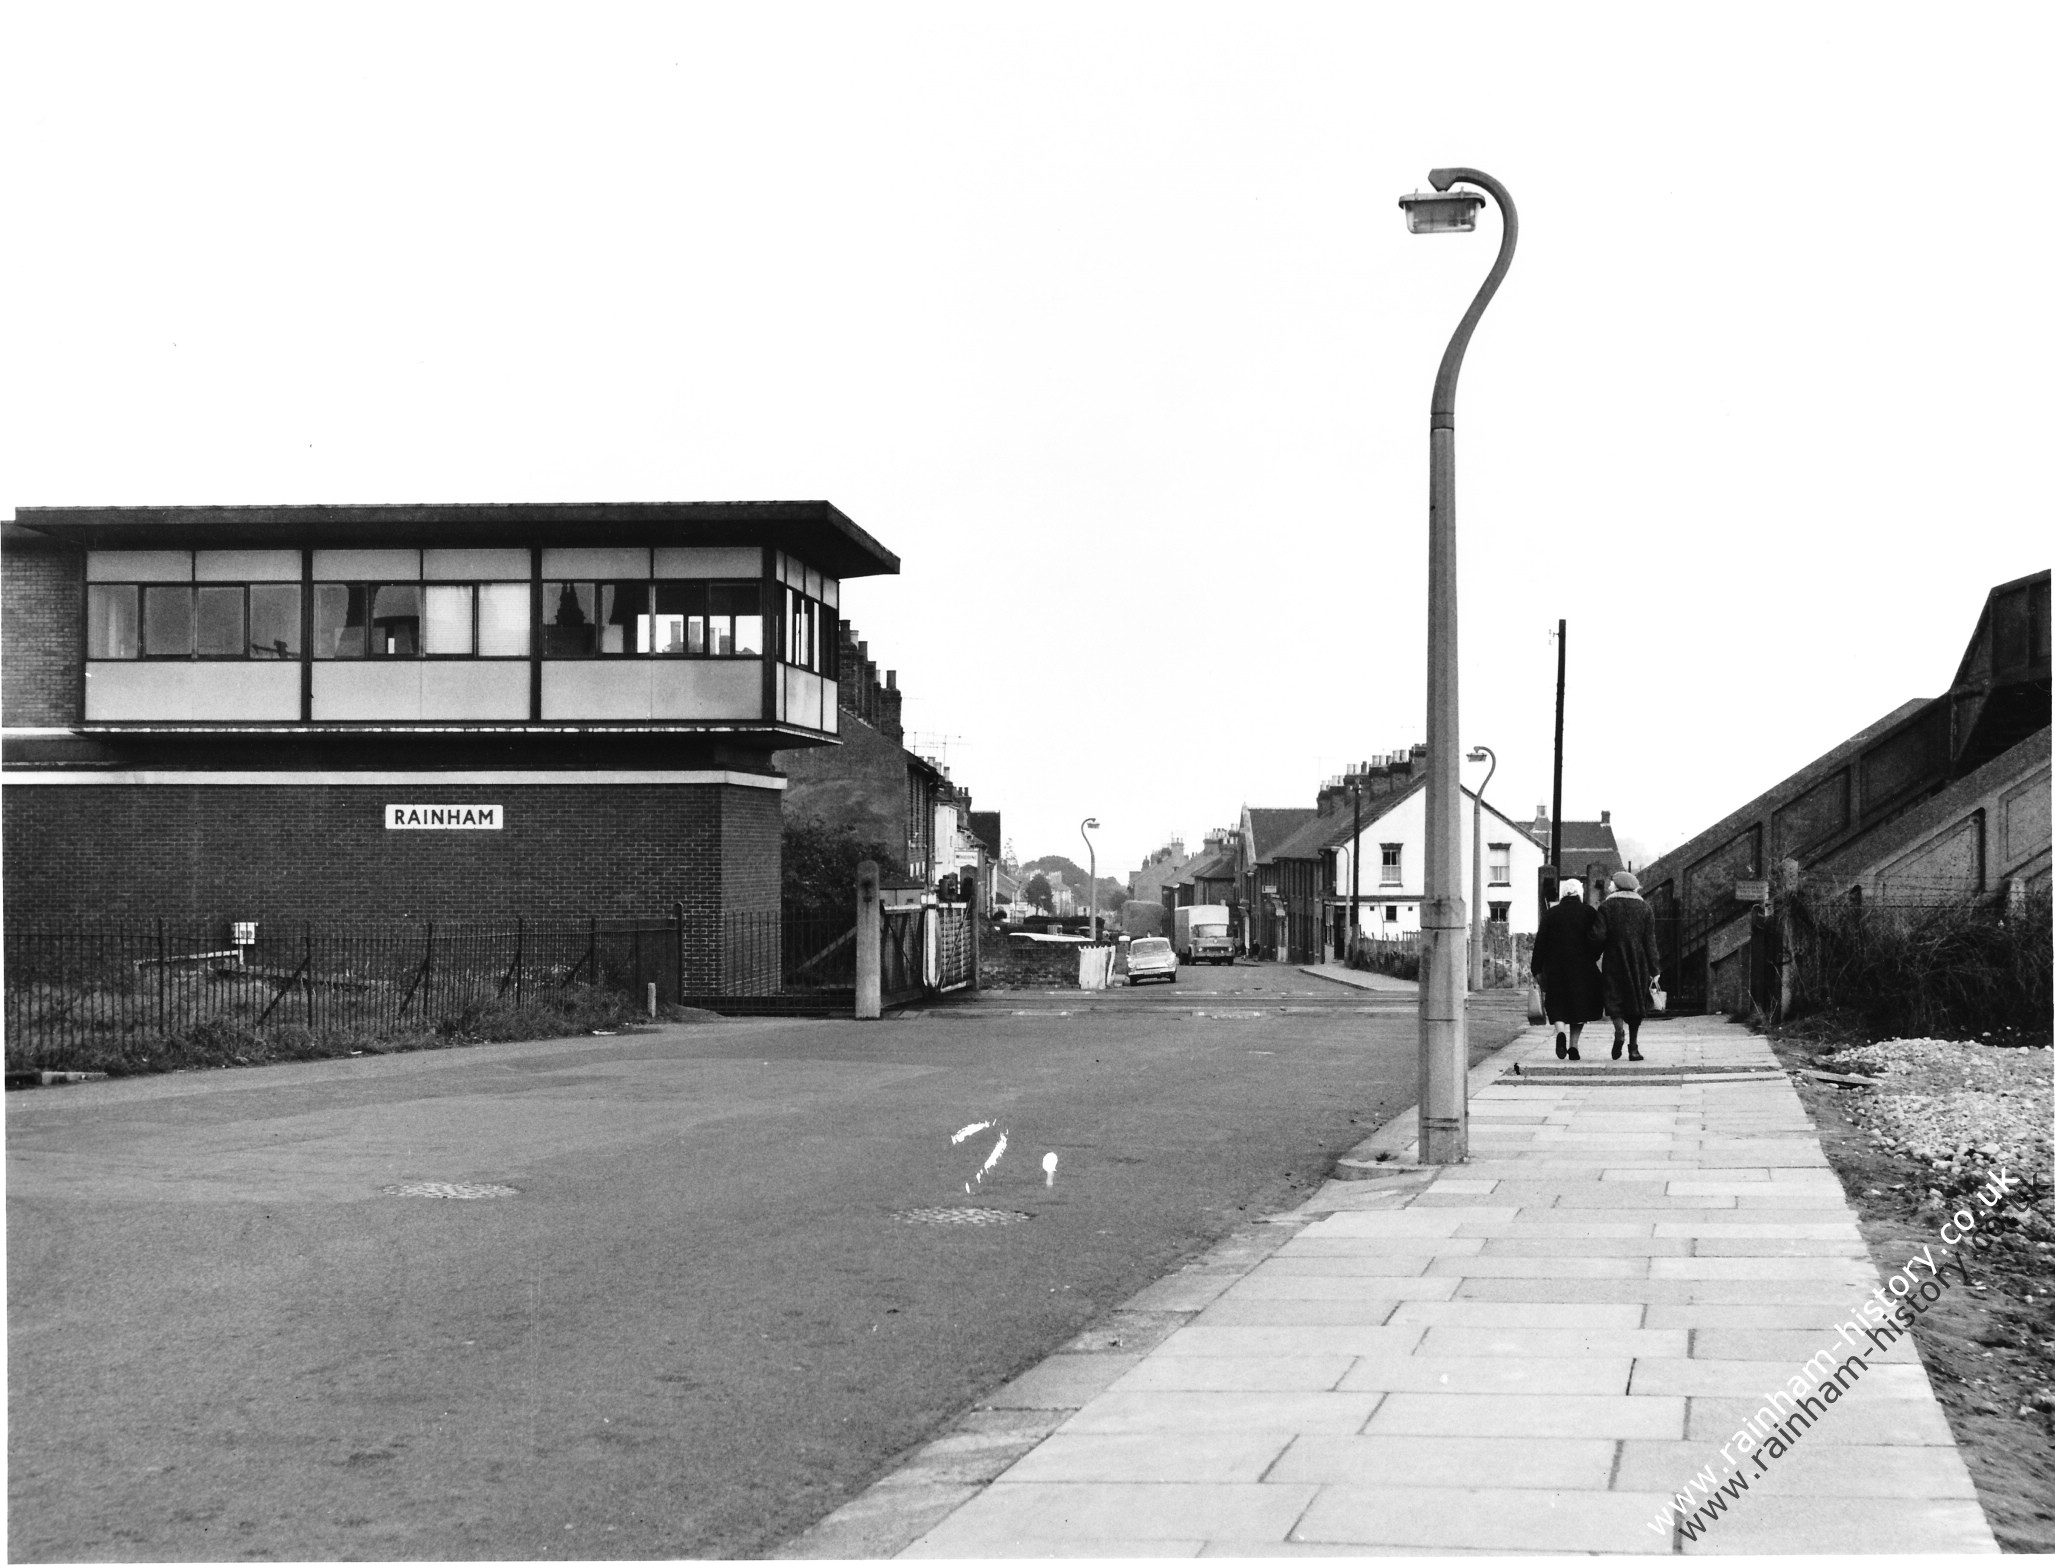 view looking down Station Road with the Rainham signal box on the left hand side of the picture. In the distance you can see a Ford Cortina and the allotments on the right hand sid